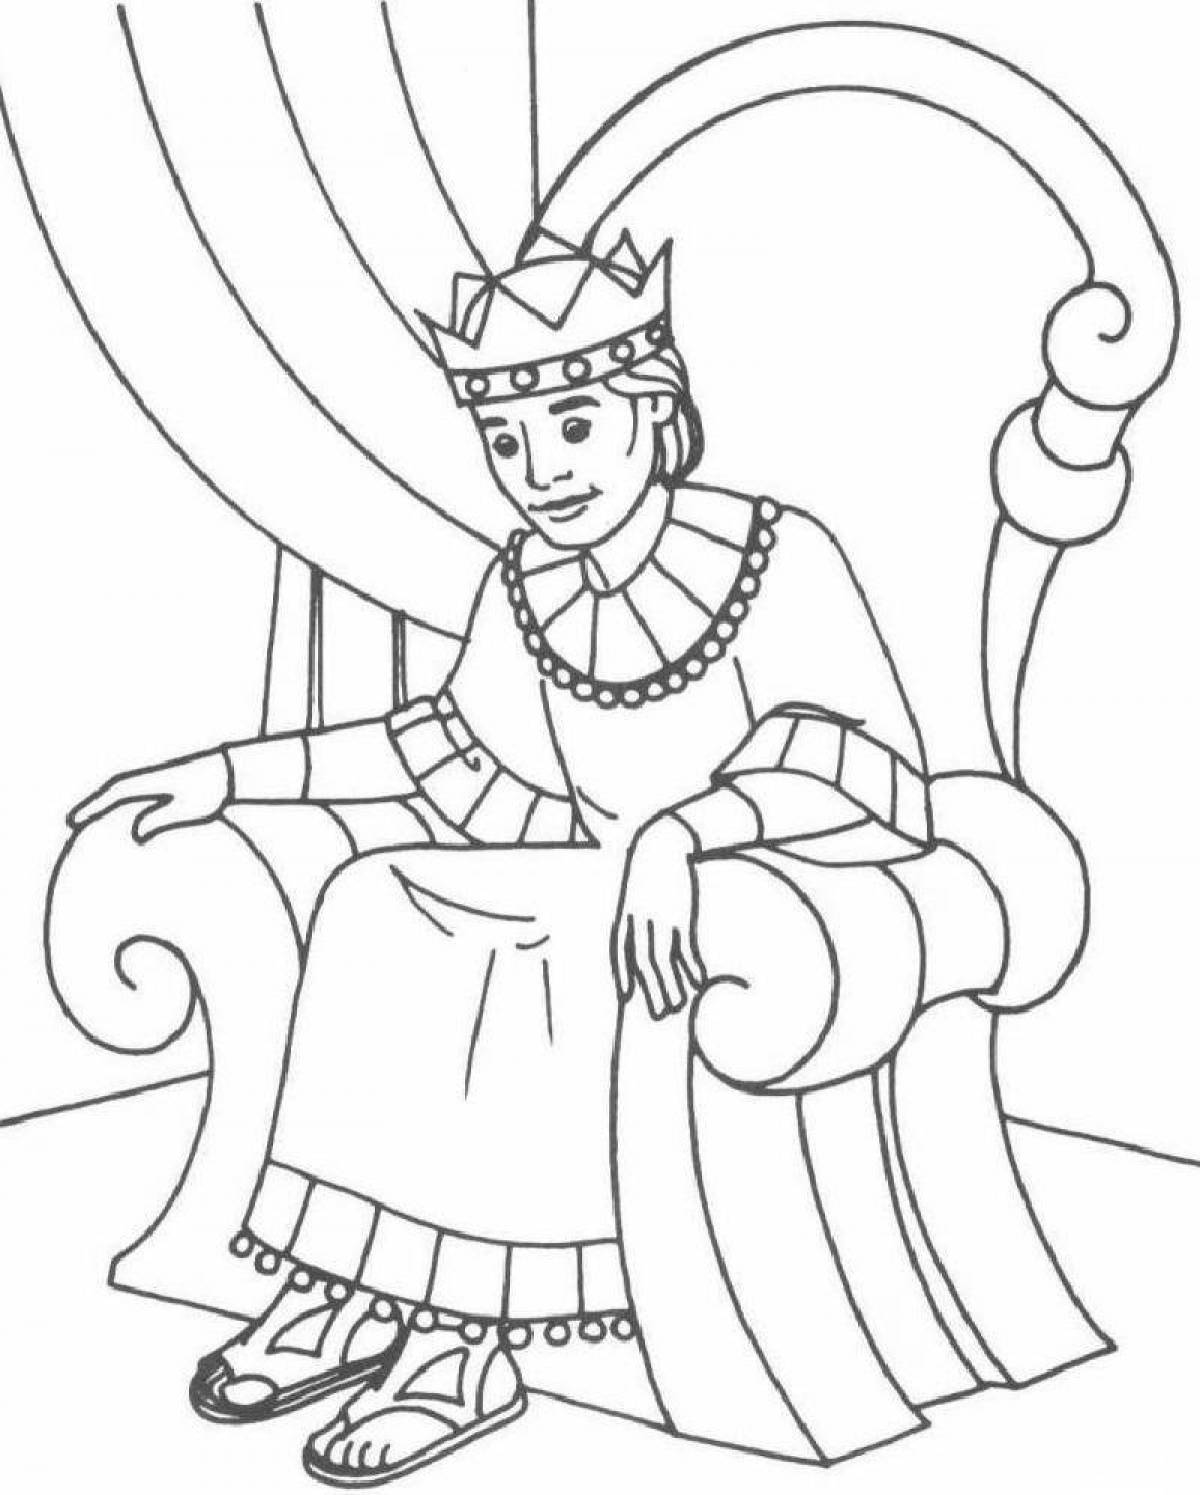 Playful king coloring pages for kids